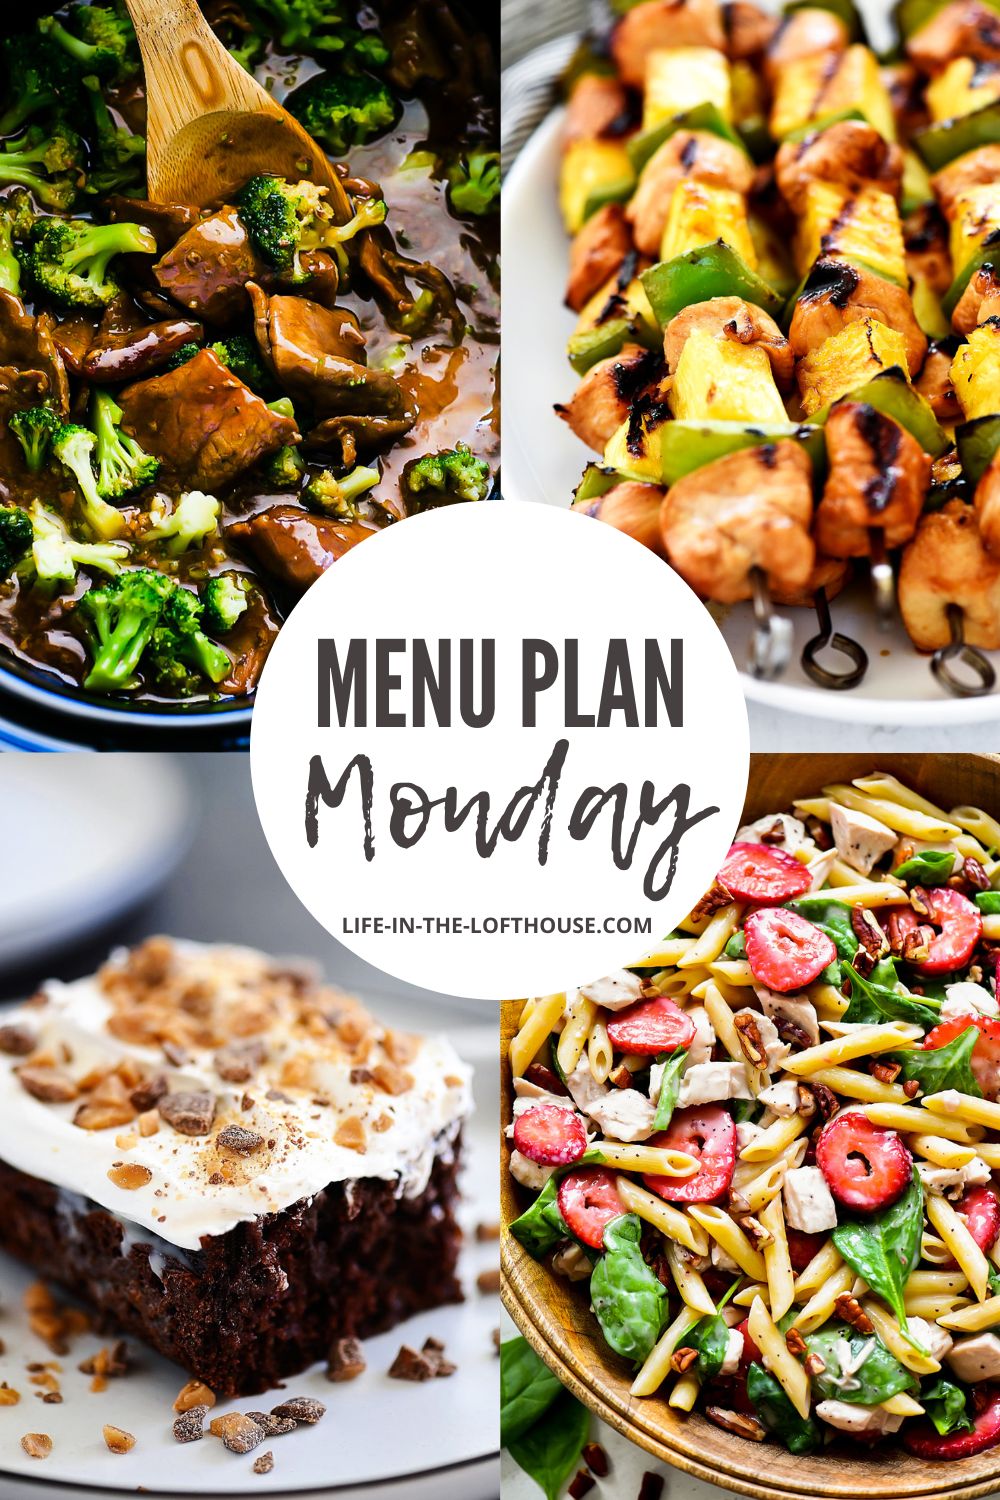 Menu Plan Monday is a list of six dinners and one dessert recipe. Life-in-the-Lofthouse.com